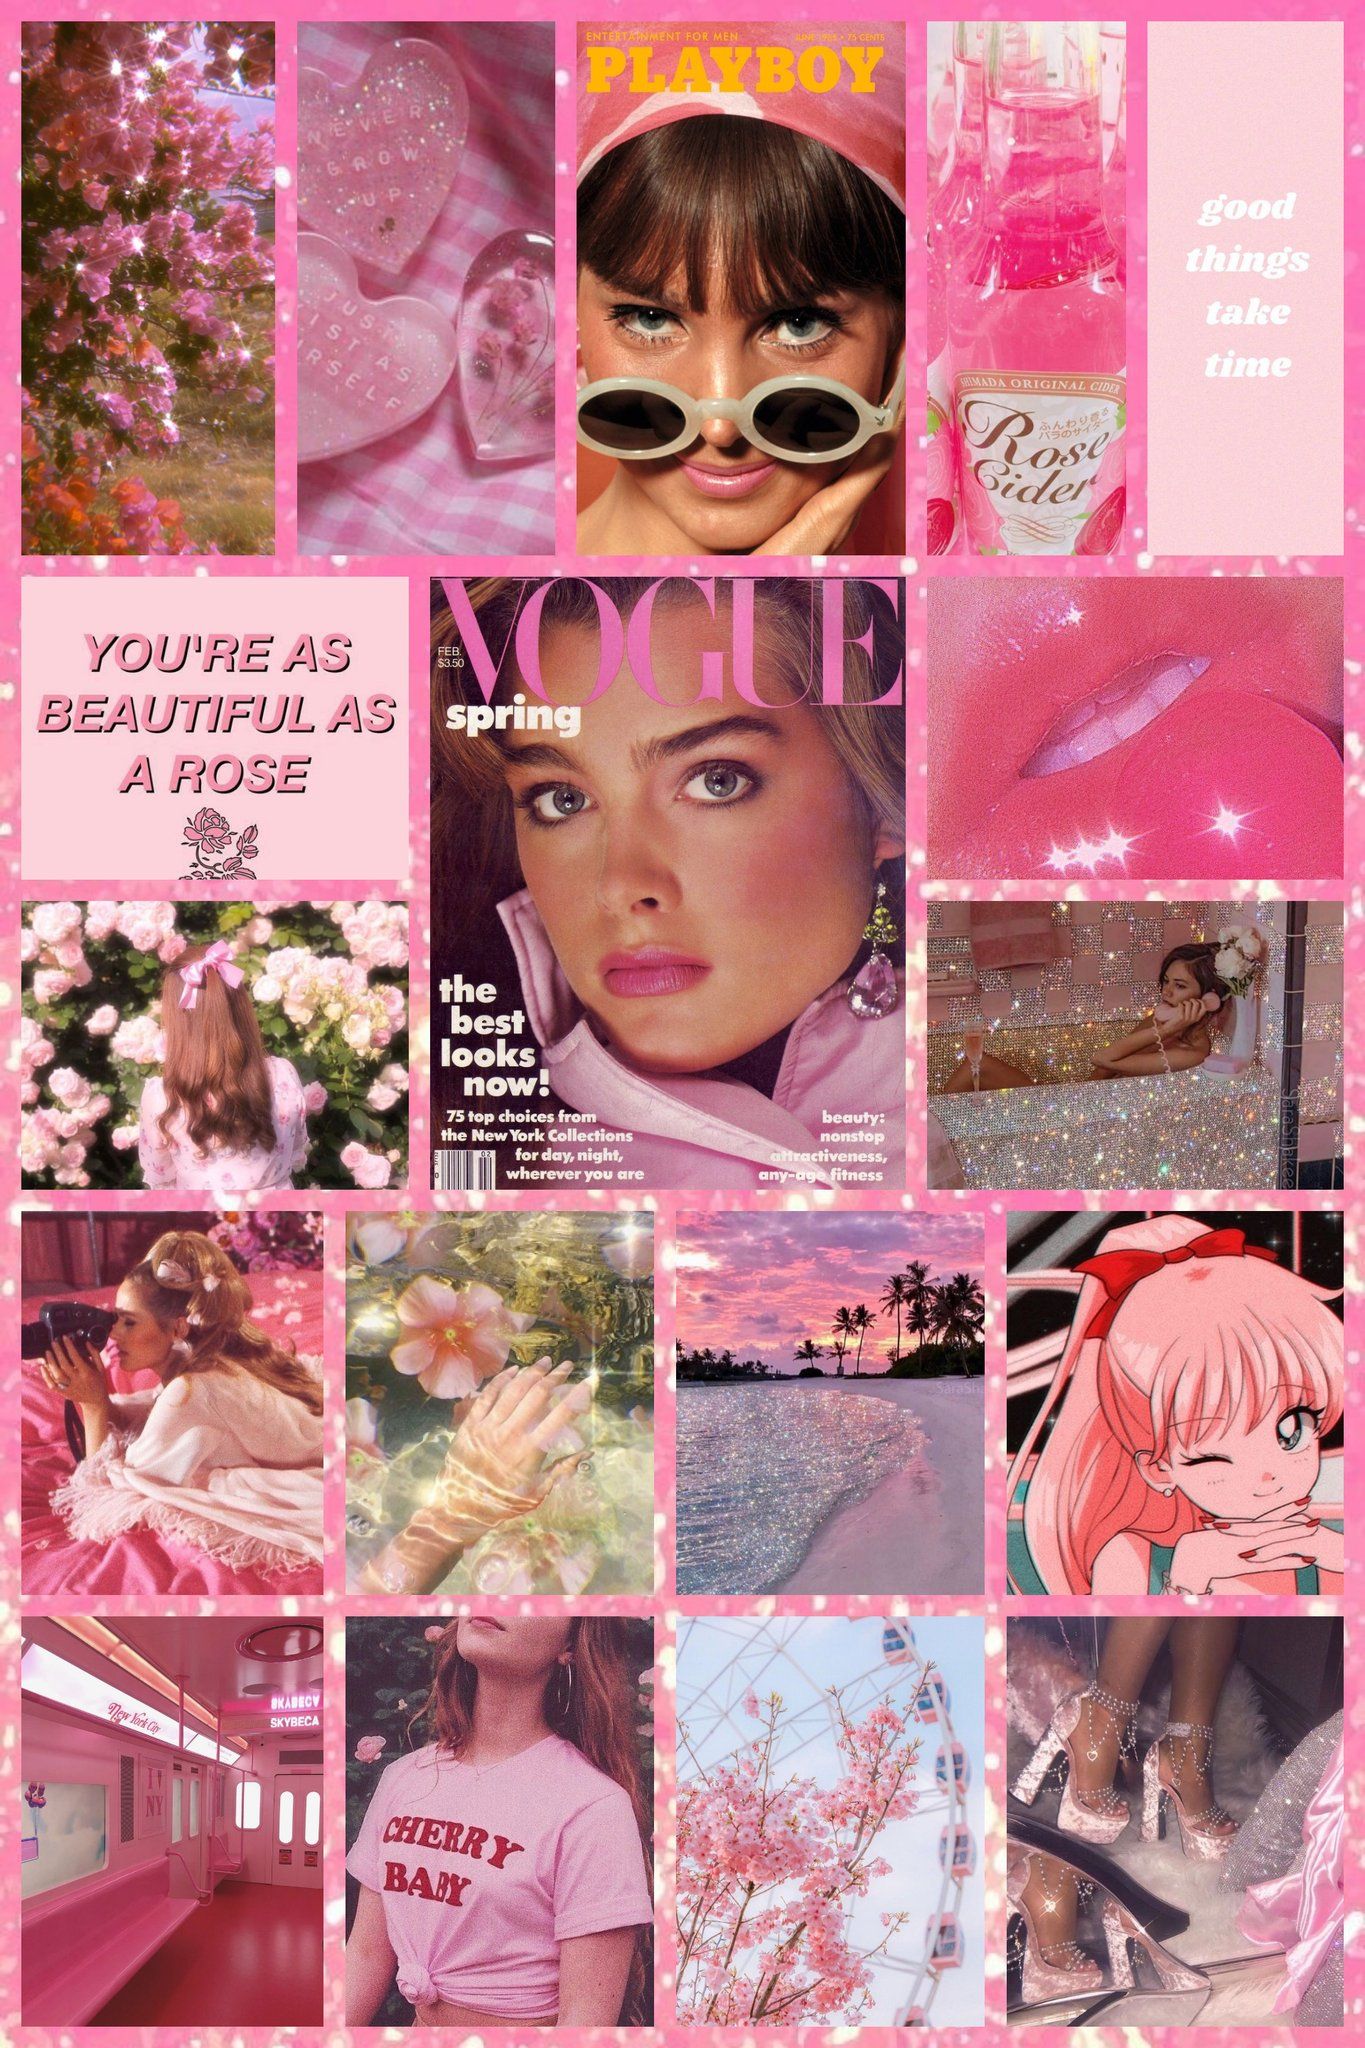 A collage of photos in a pink aesthetic including magazine clippings, photos of women, and anime. - Makeup, Vogue, collage, fashion, pink collage